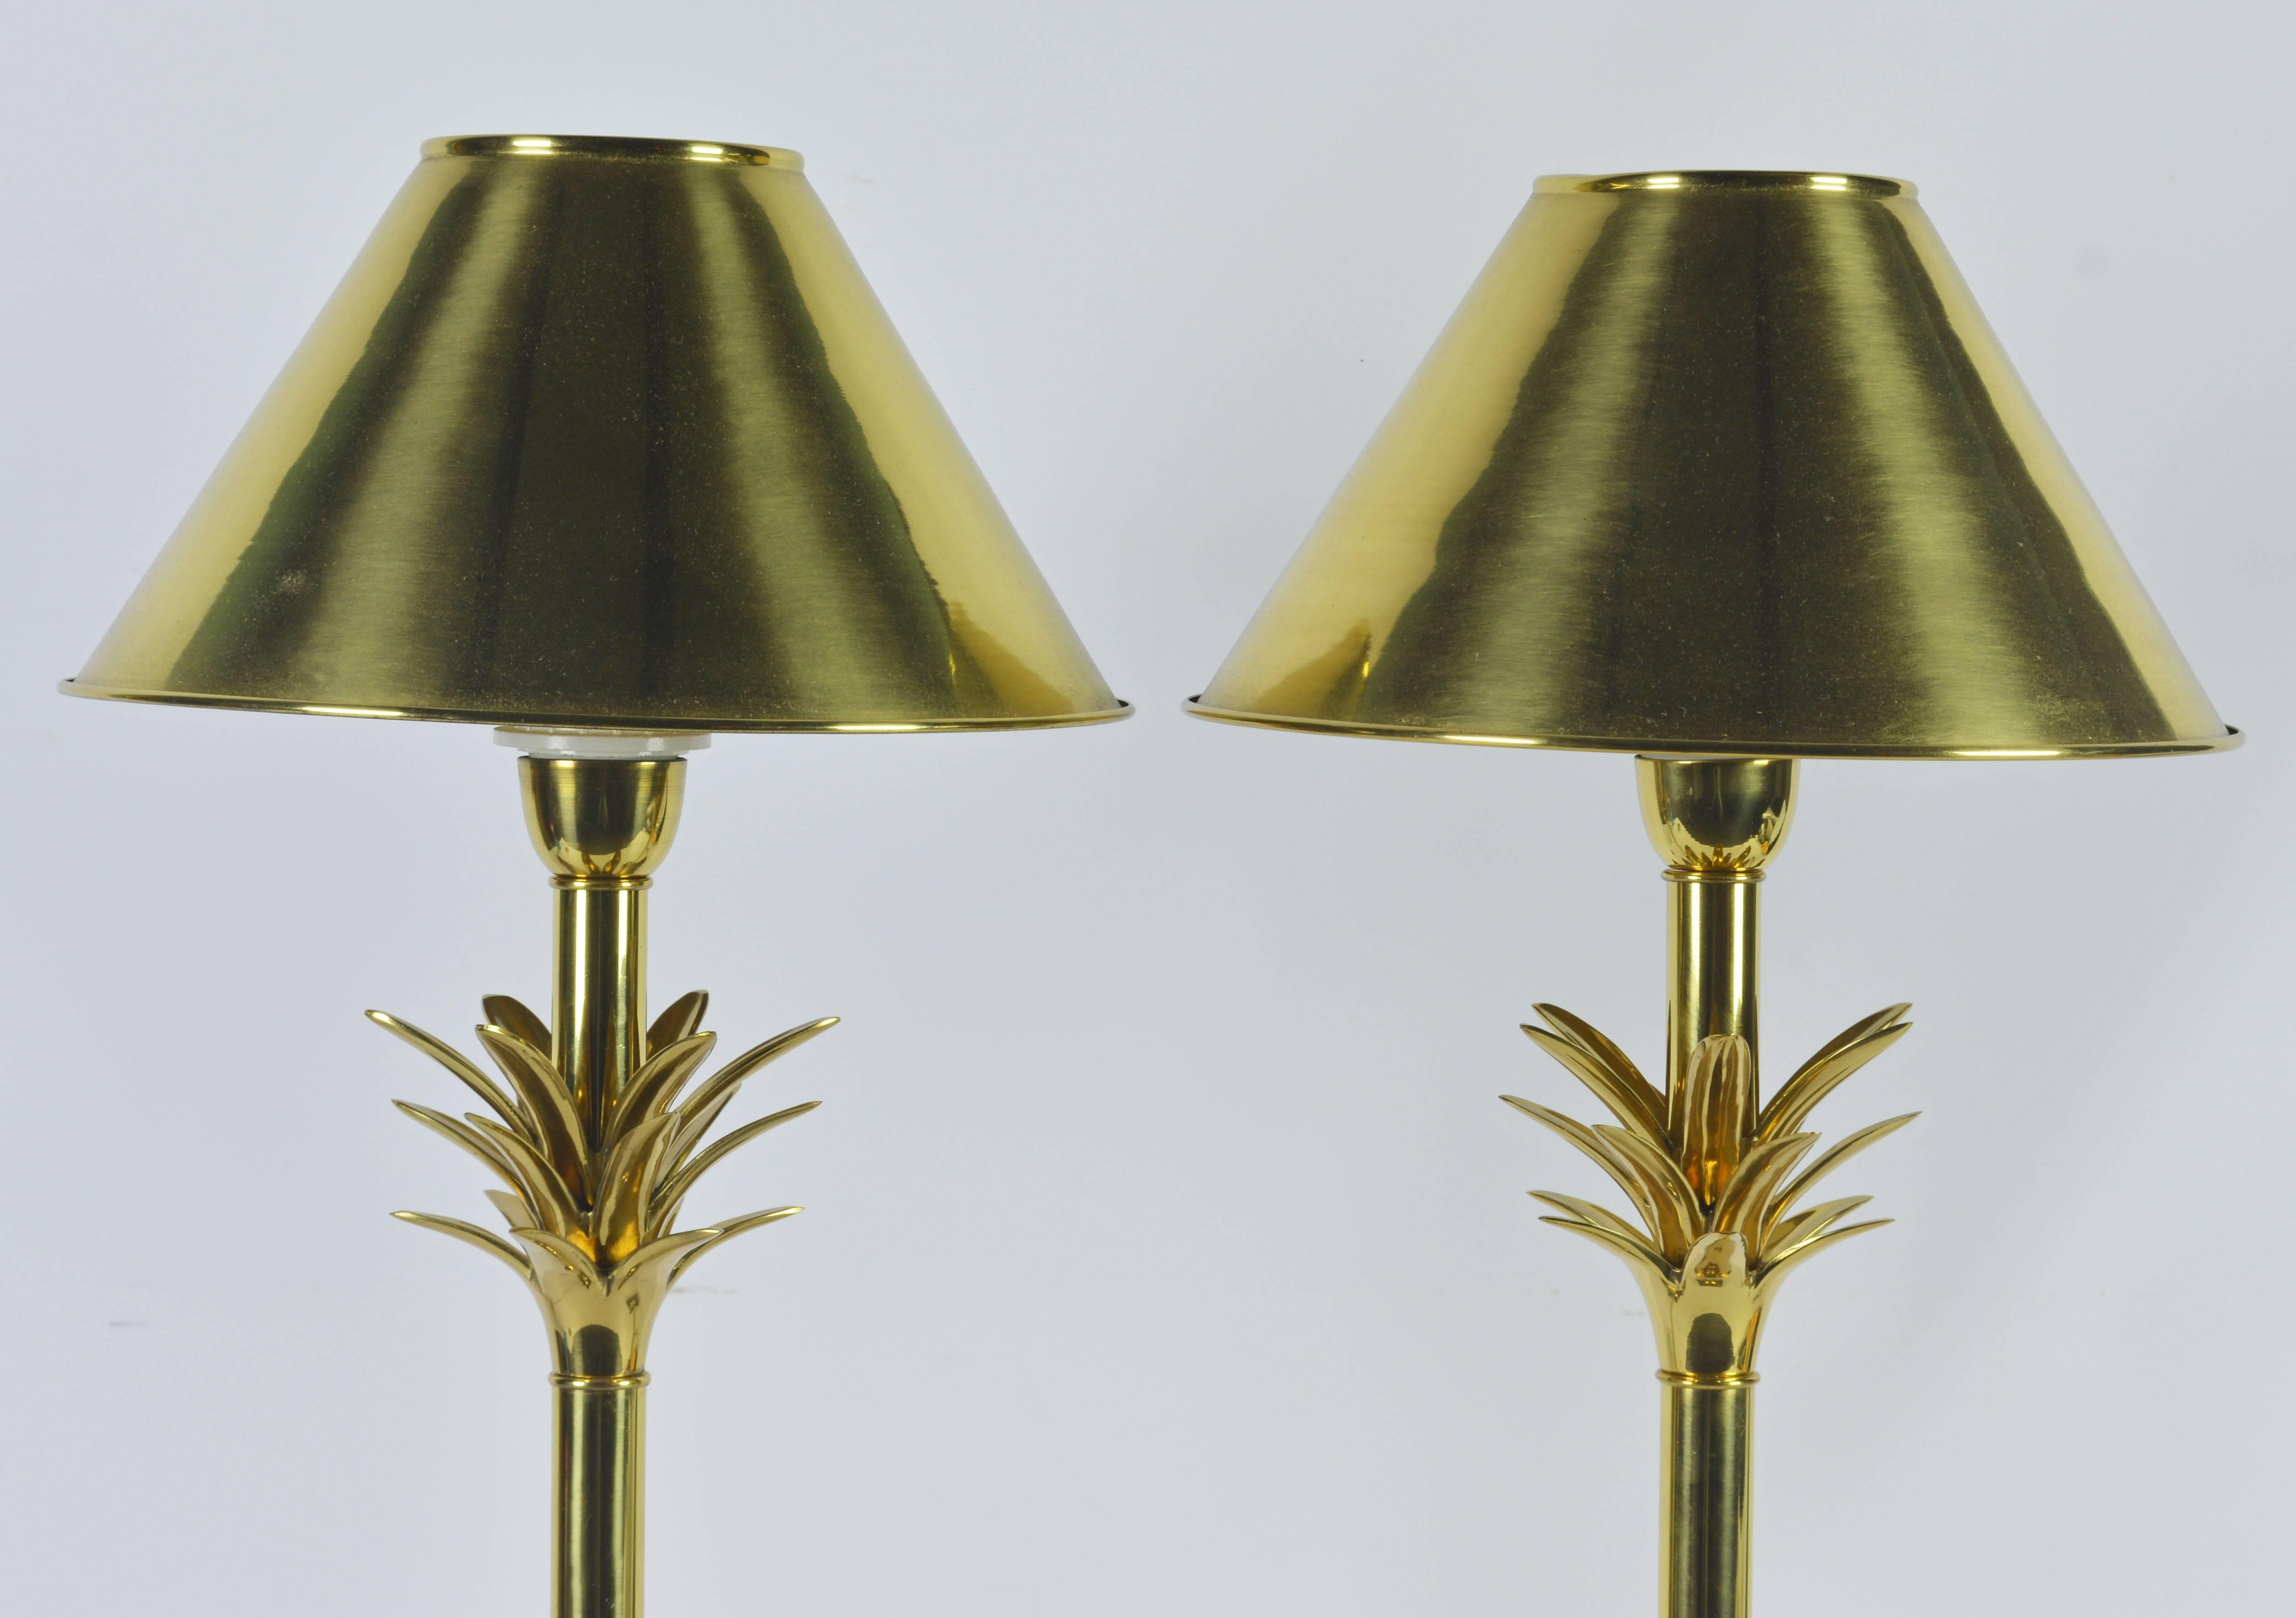 Made of solid brass and with brass shades these vintage lamps in the Art Deco style are well designed, elegant and of great craftsmanship.